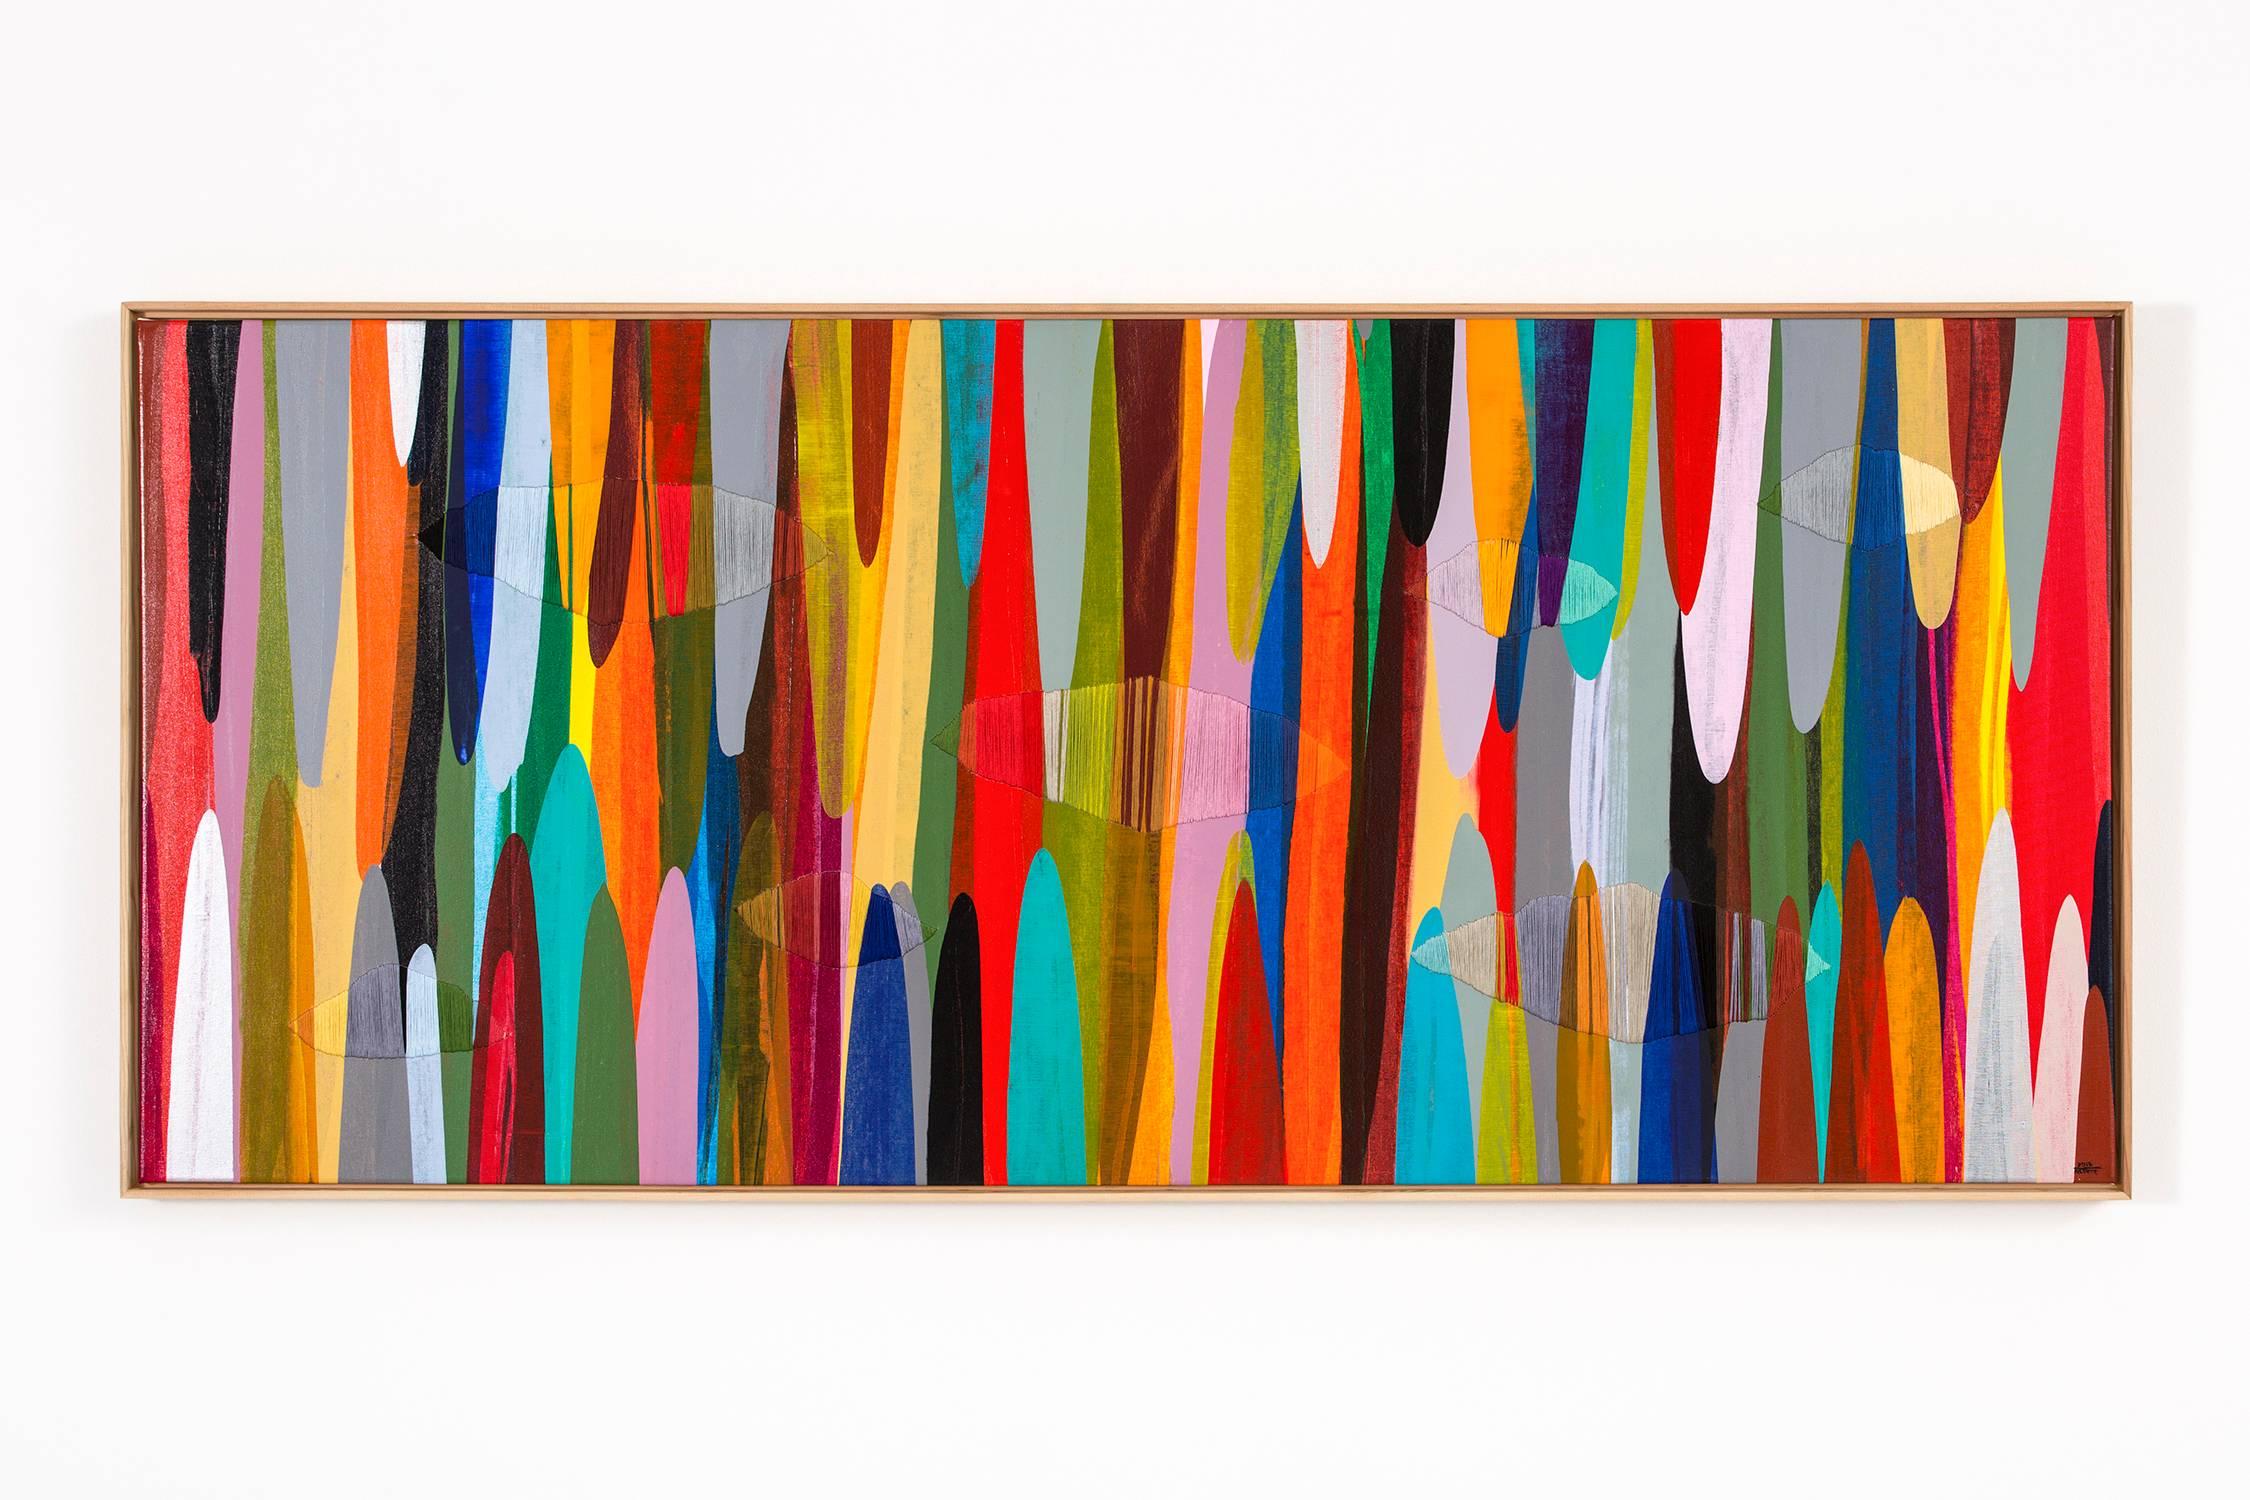 POEMES XLVII - Abstract Mixed Media Art by Raul de la Torre